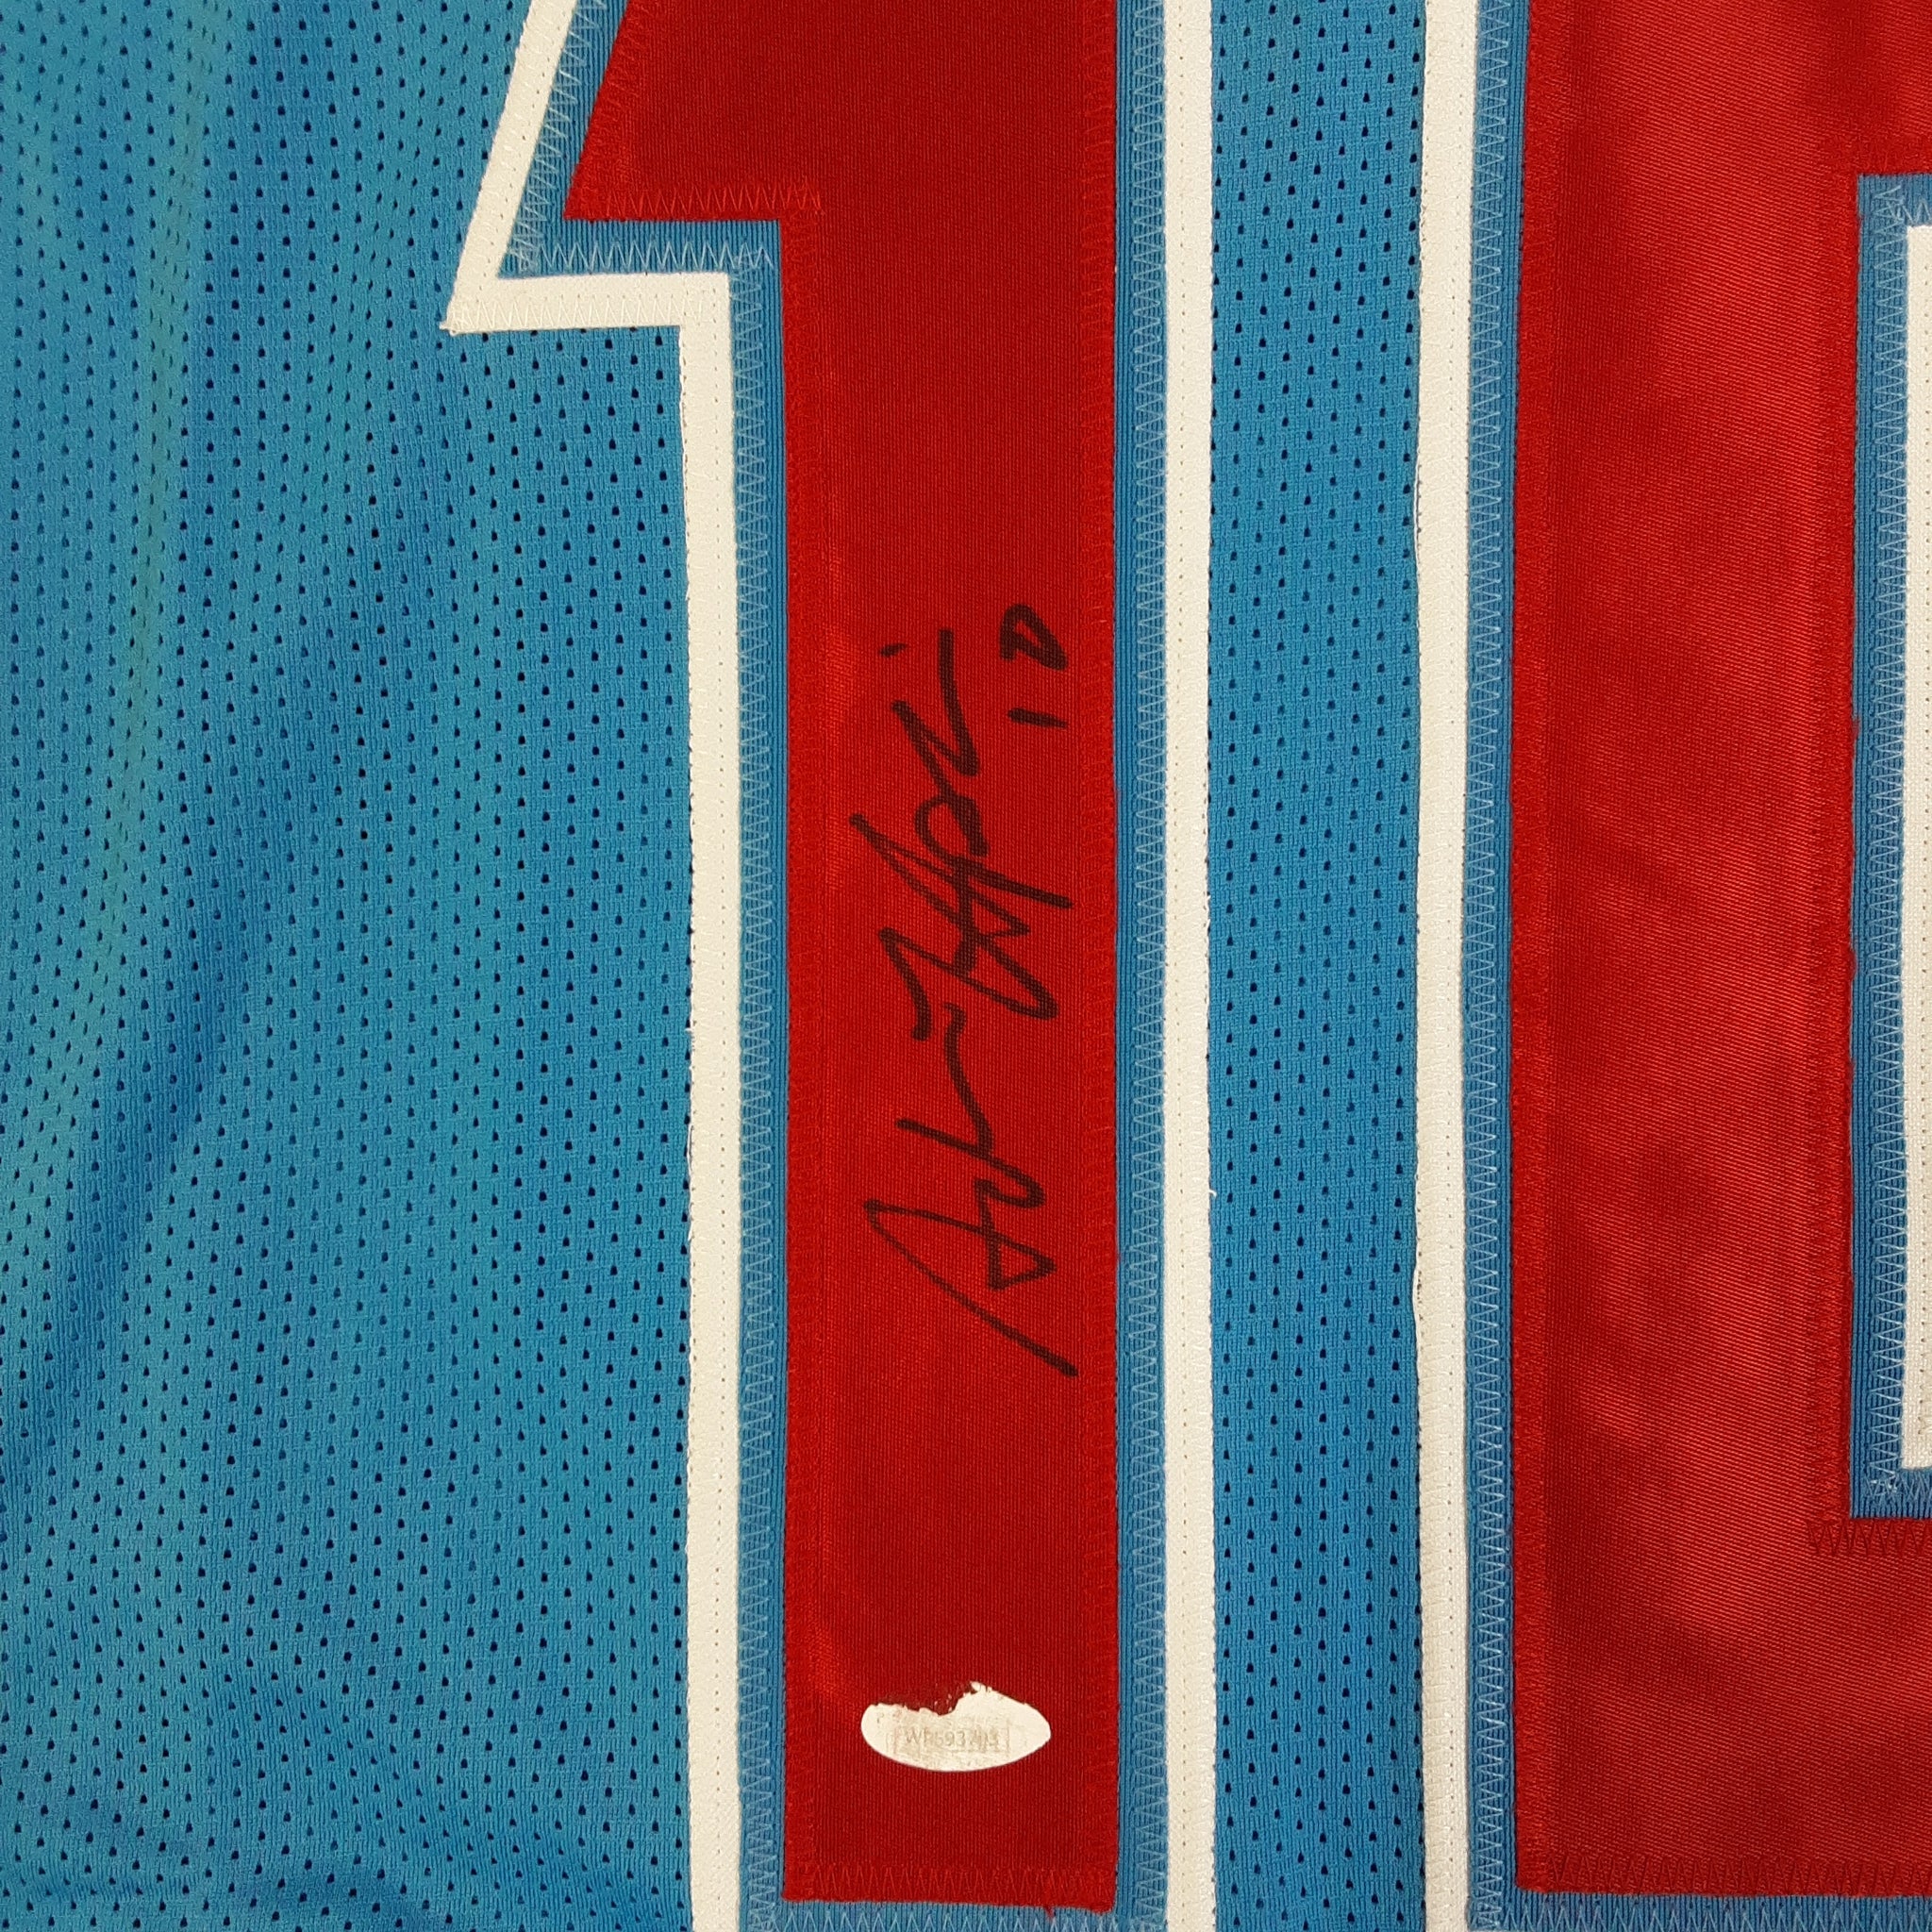 Adam Humphries Authentic Signed Pro Style Jersey Autographed JSA-